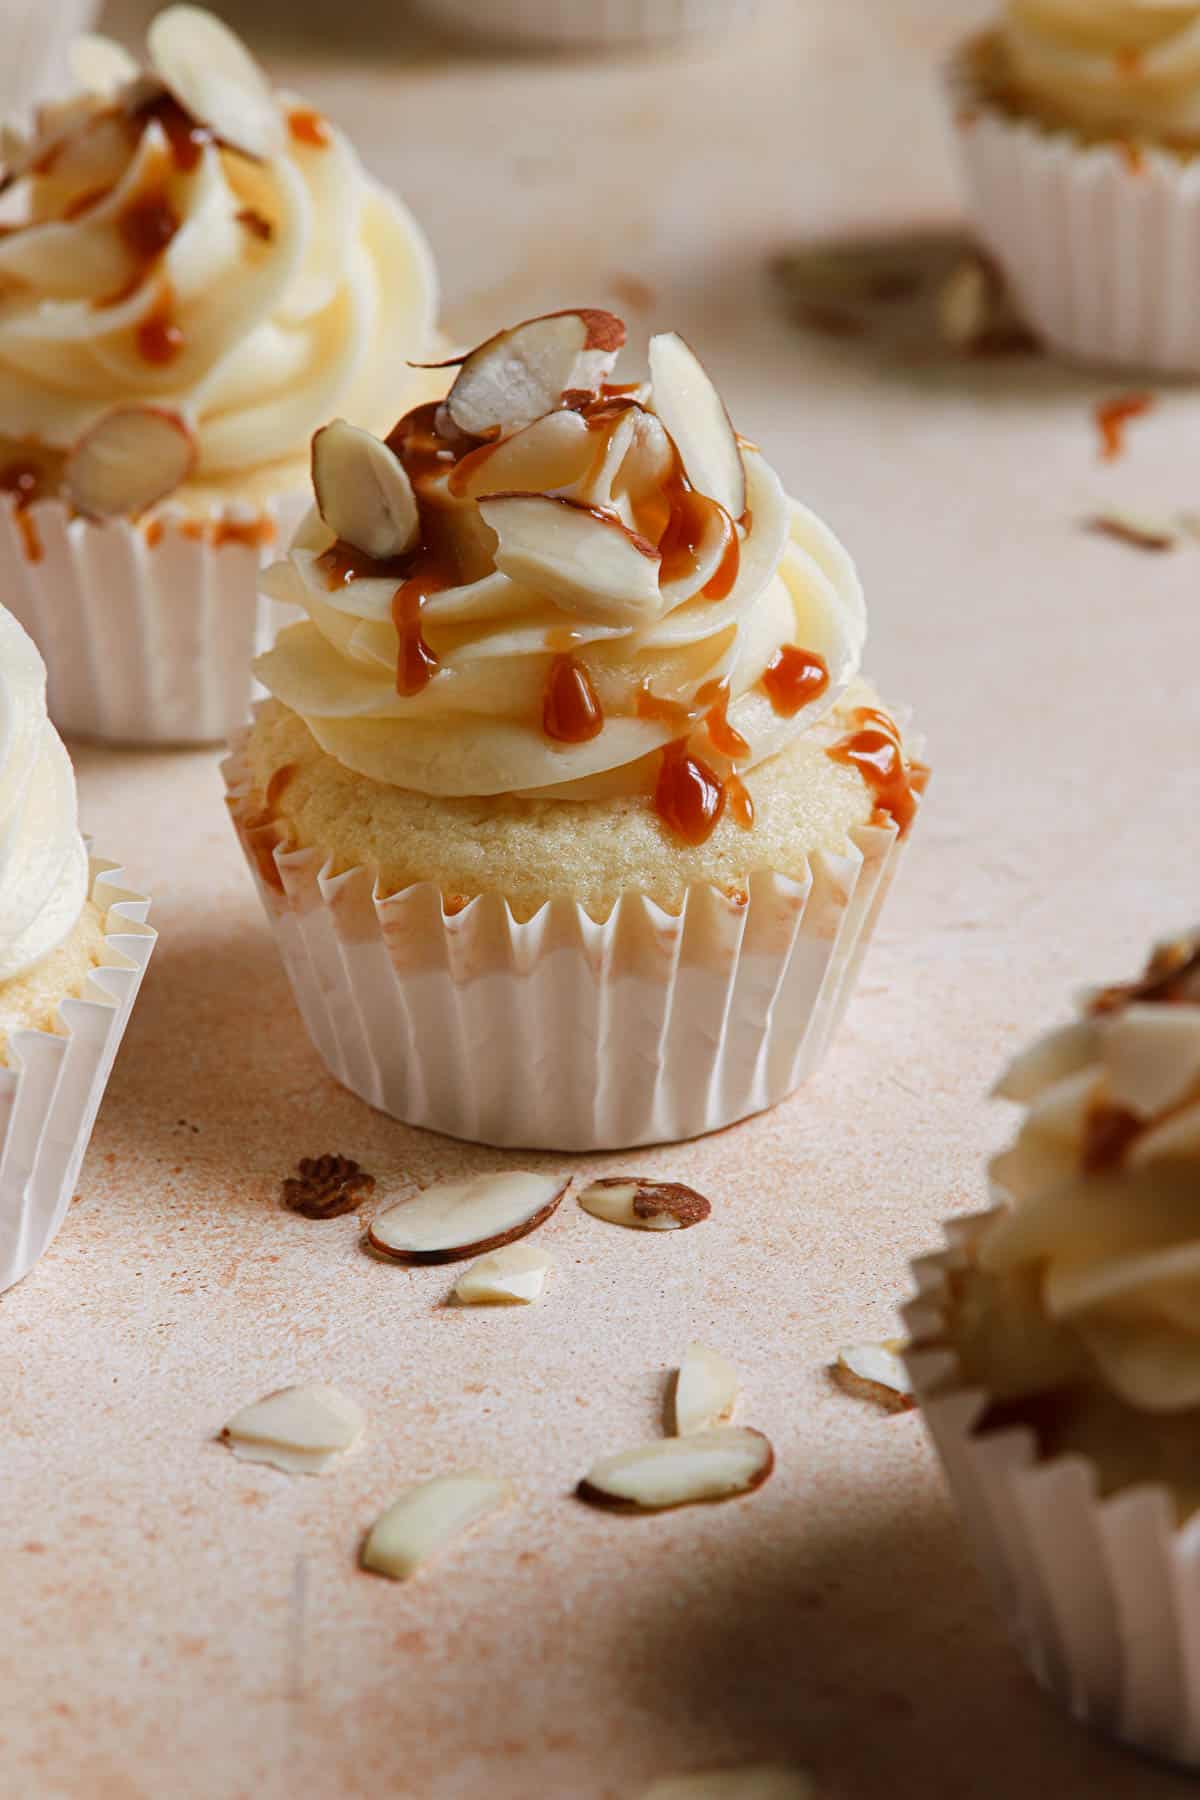 a cupcake topped with caramel and sliced almonds